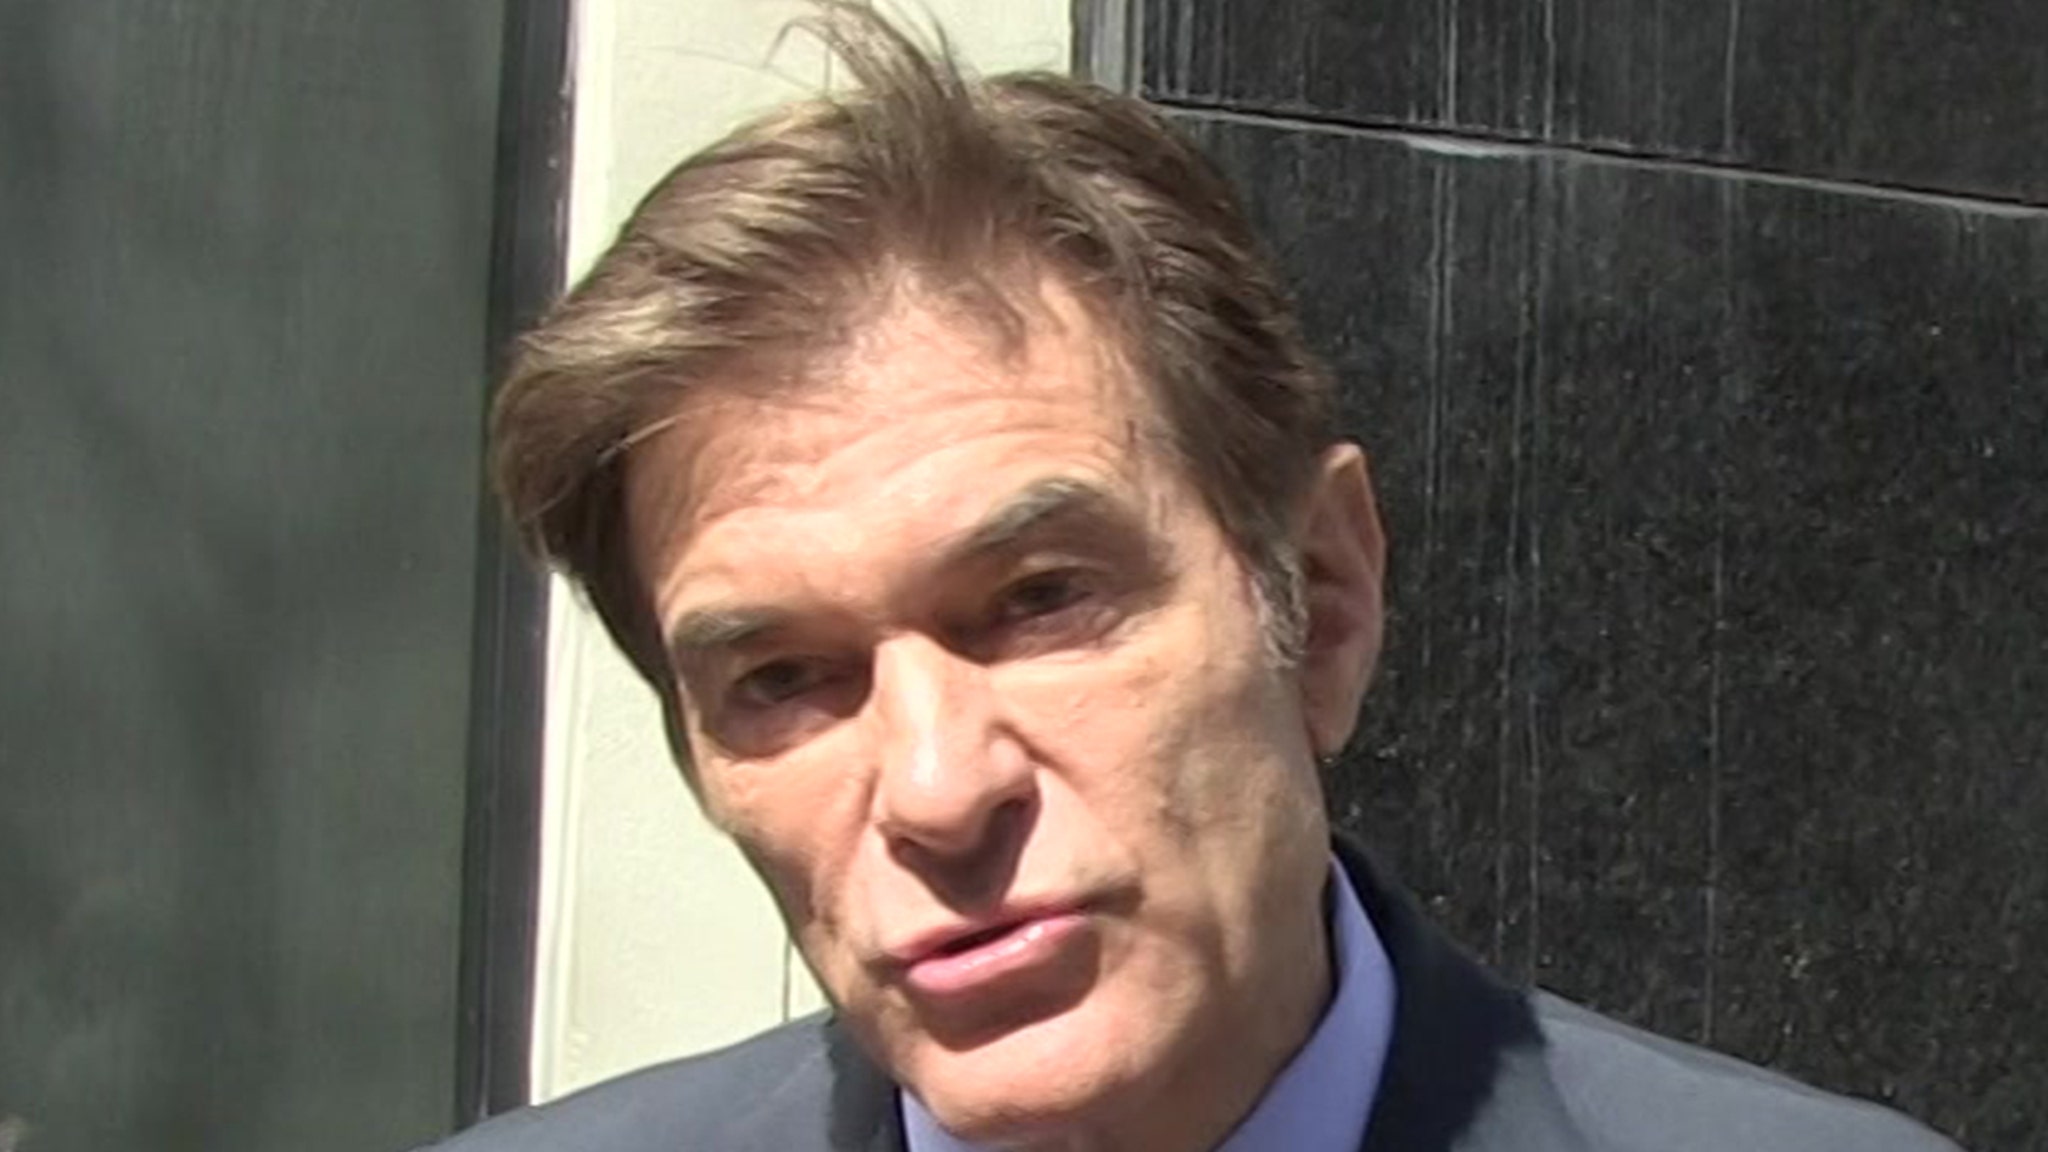 Dr. Oz Rushes to Help Man Who Collapsed at Republican Caucus Meeting